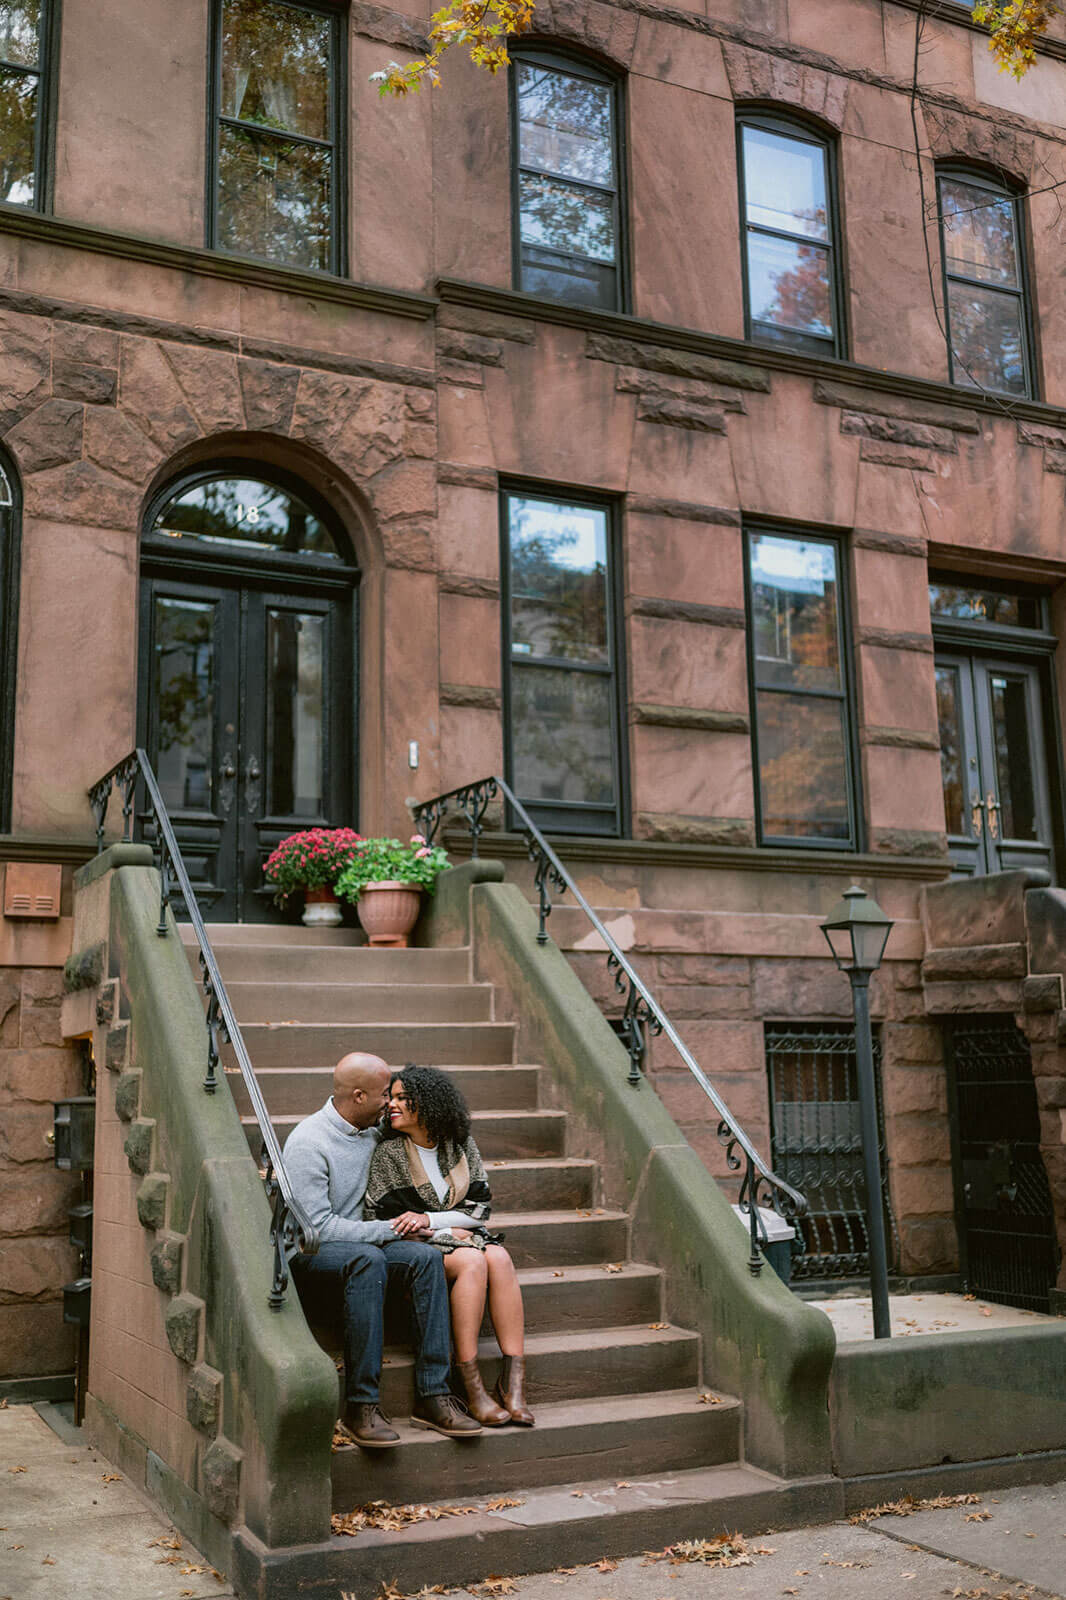 The engaged couple is sitting in a staircase on the streets of Brooklyn. NYC Christmas Engagement Photos by Jenny Fu Studio